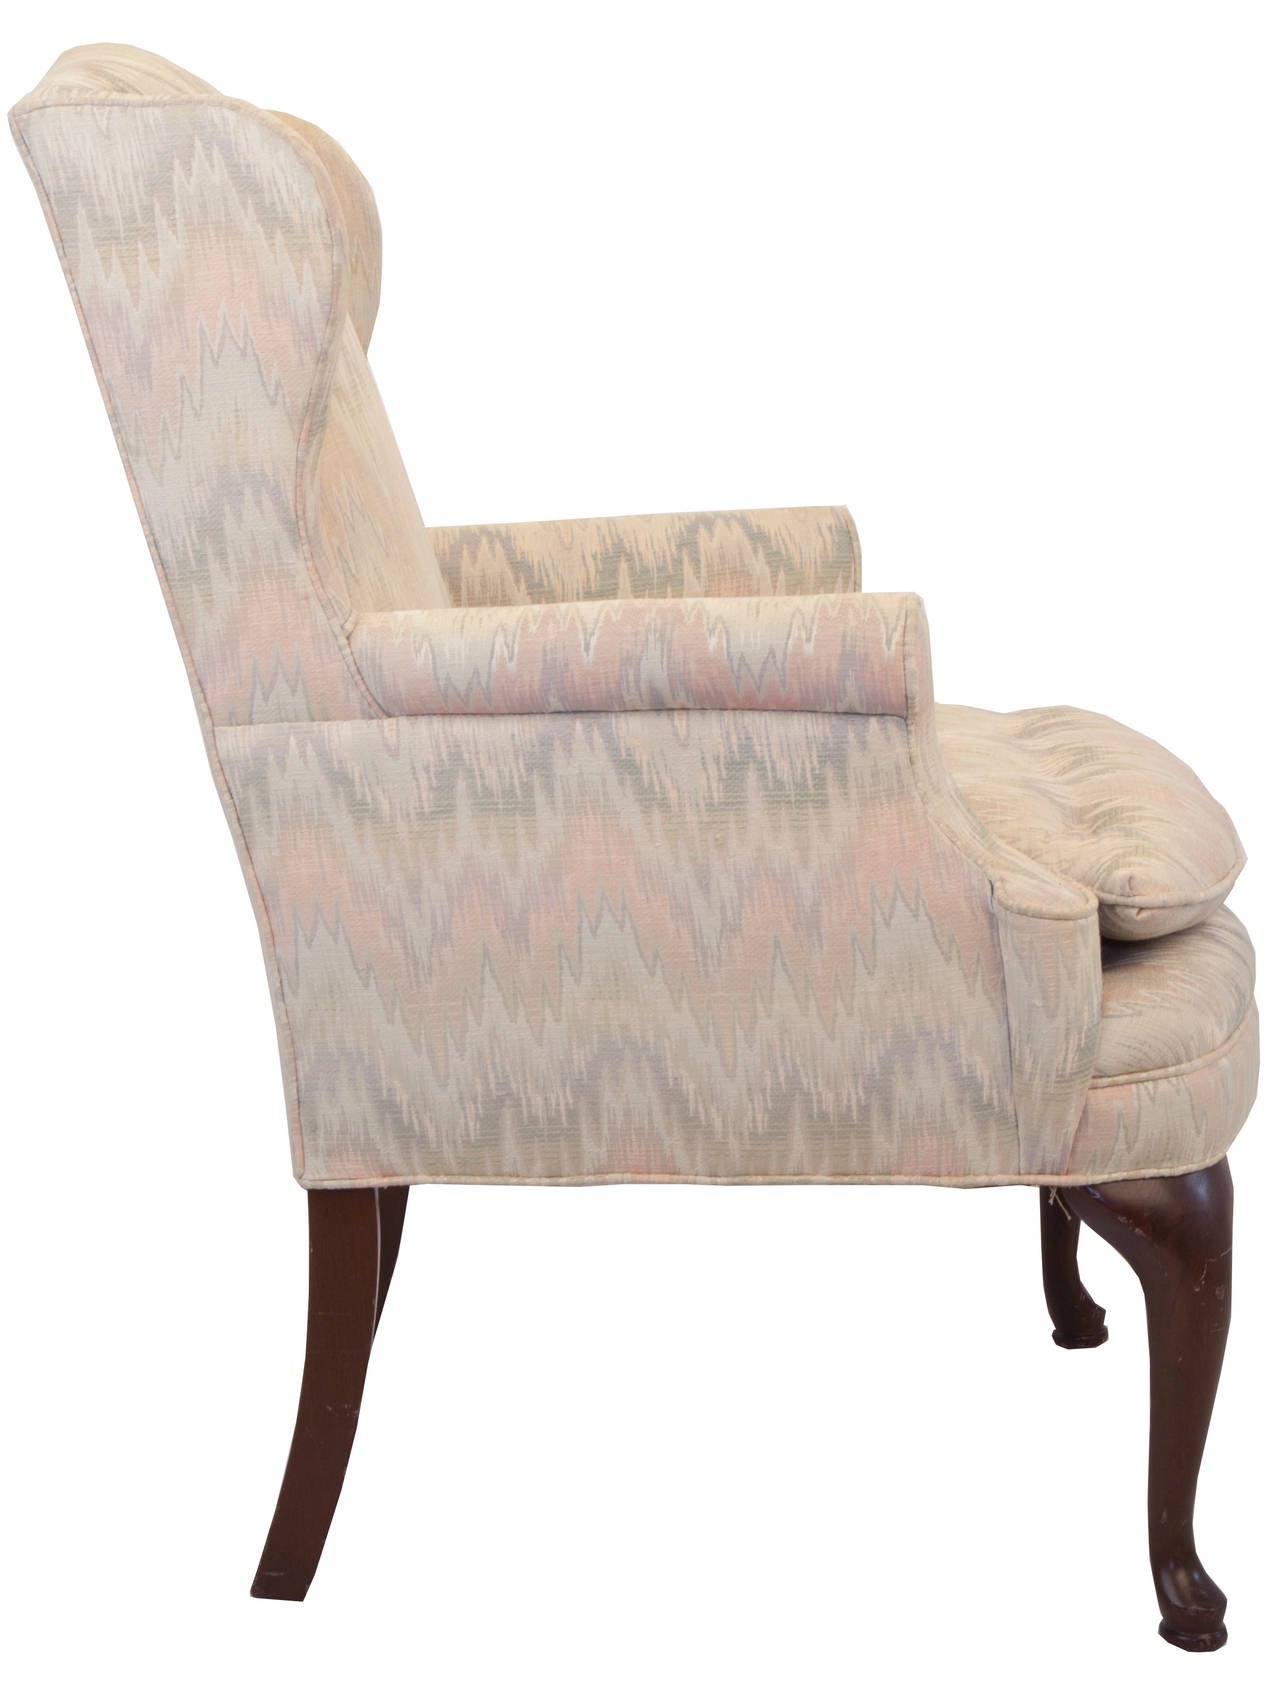 Ladies scale wing chair with carved mahogany pad feet on the front legs, square curved legs on the back. Uphostered in pointe d'hongrie (flame stitch) tapestry in soft celedon and dusty rose. Loose seat cushion with buttons, scrolled arms with